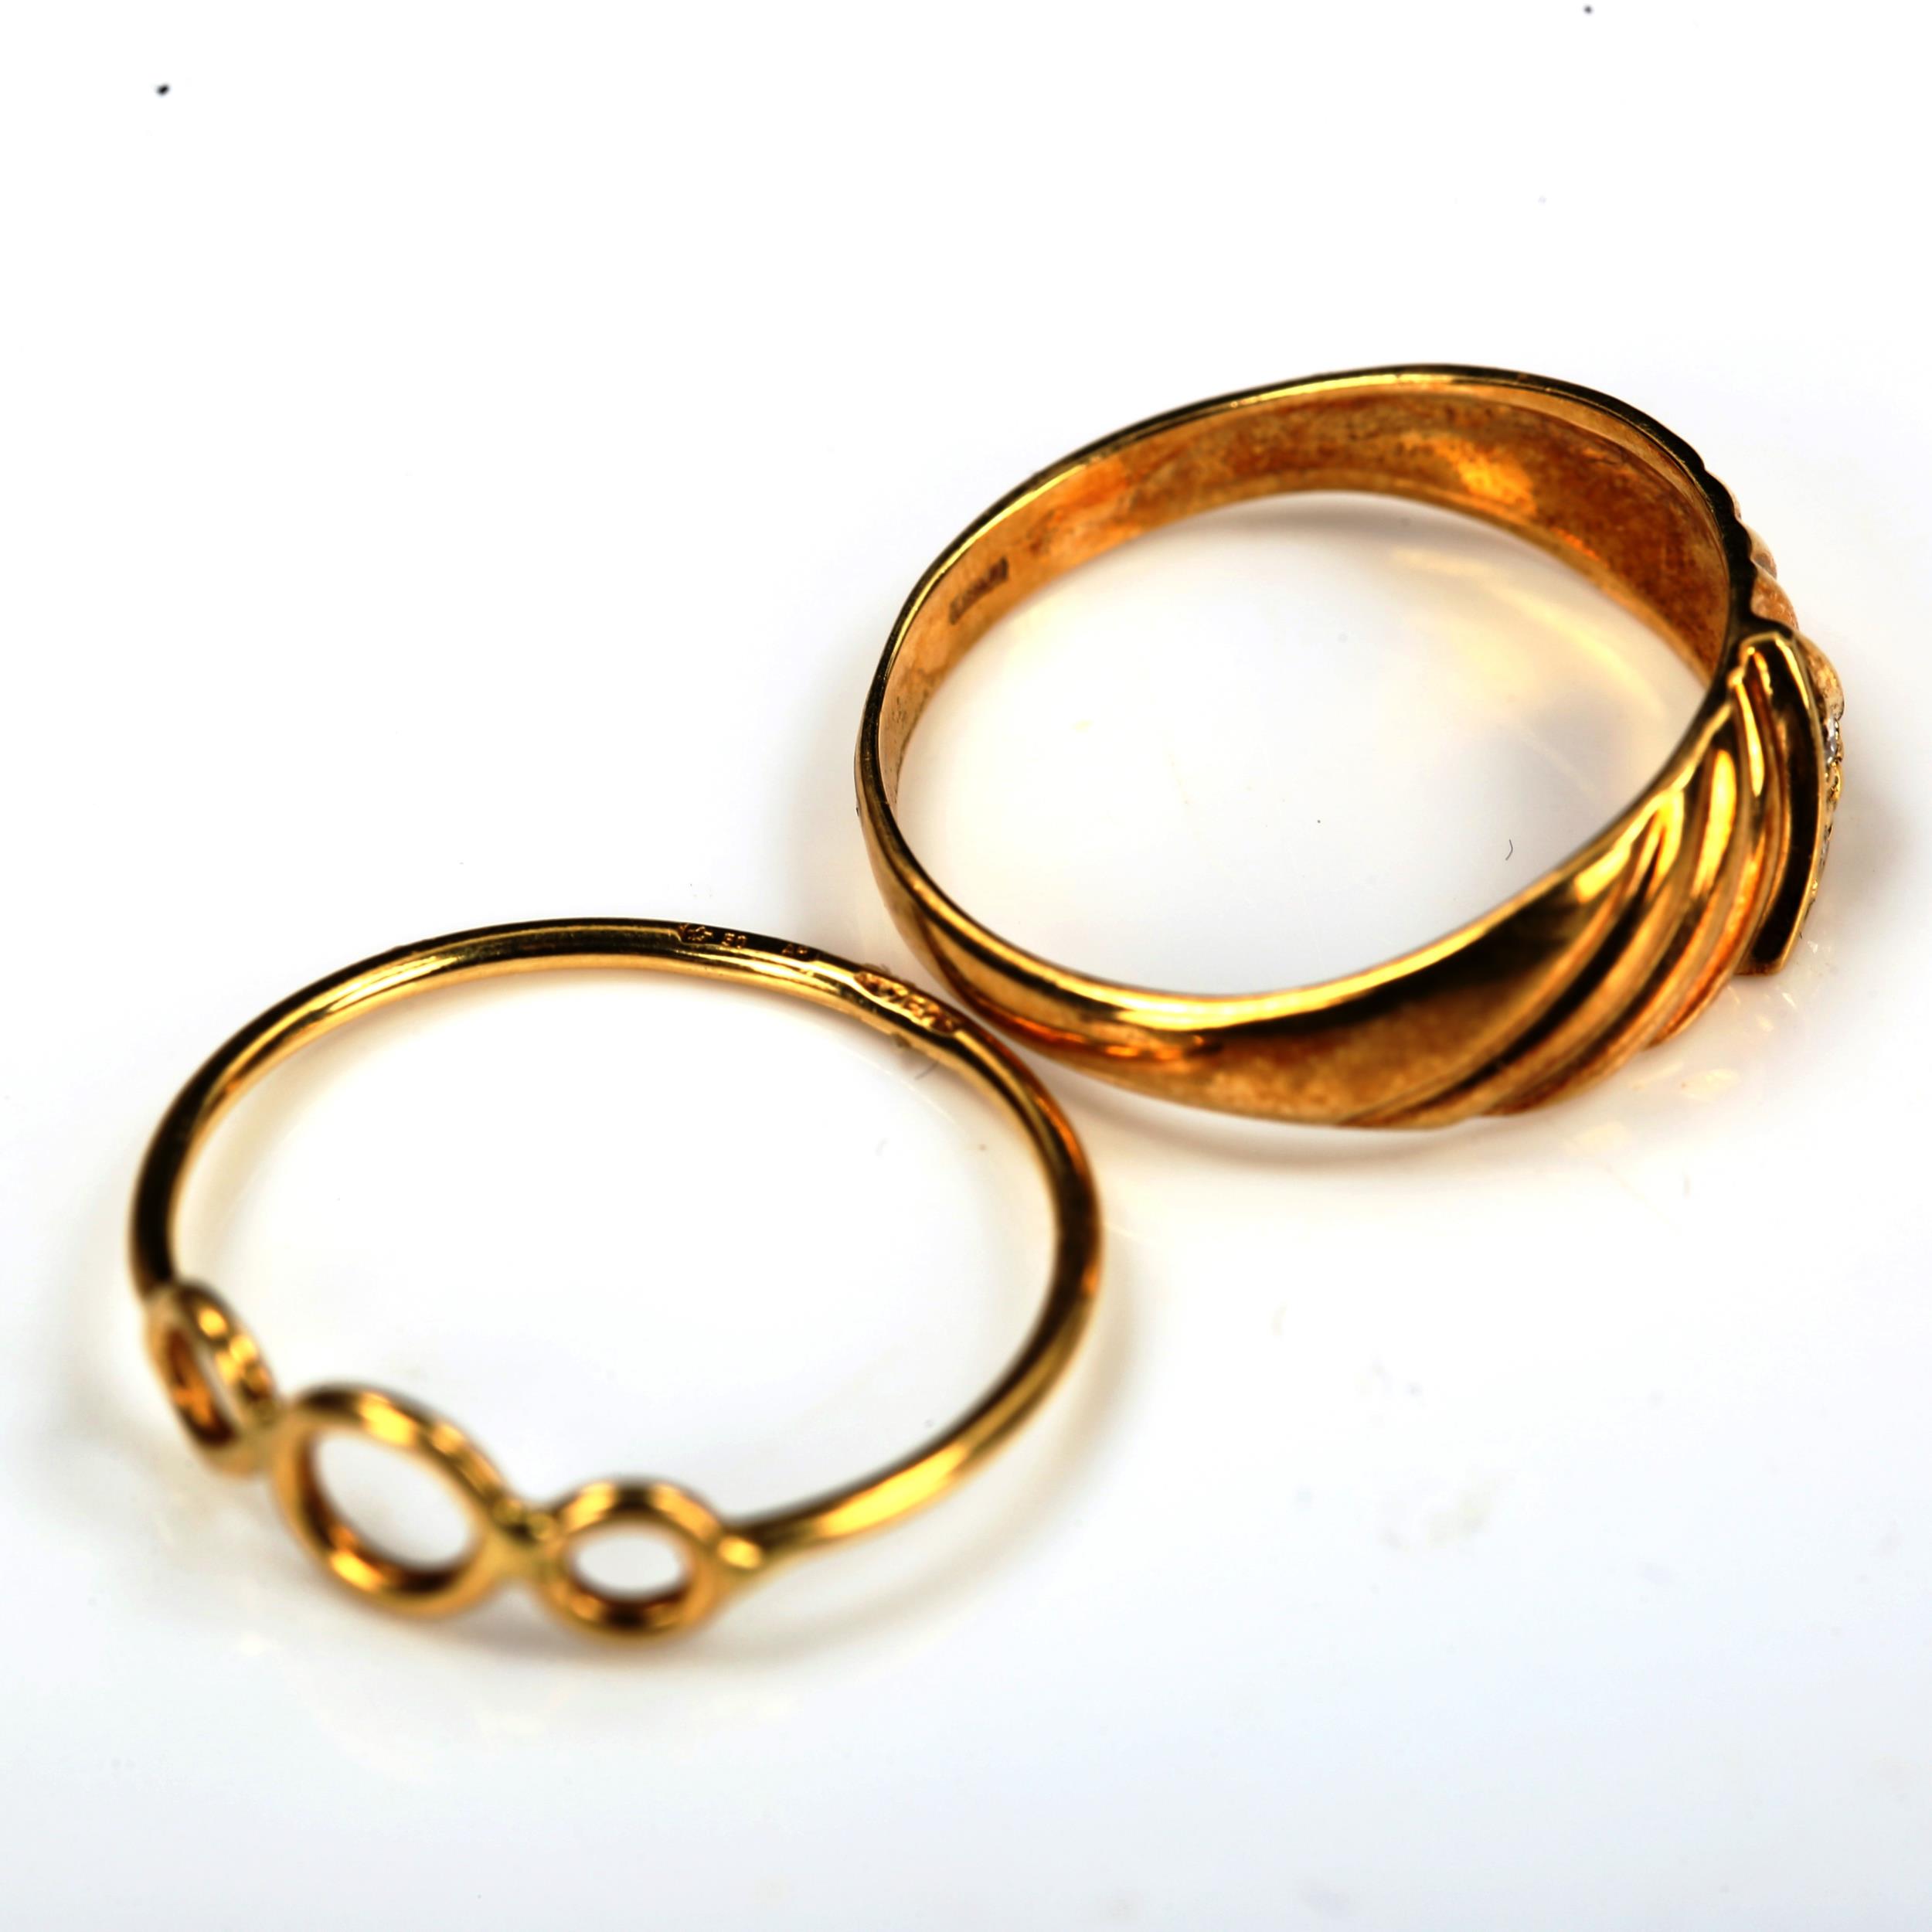 2 Continental 18ct gold rings, both size L, 3g total (2) No damage or repairs, marks slightly - Image 3 of 4